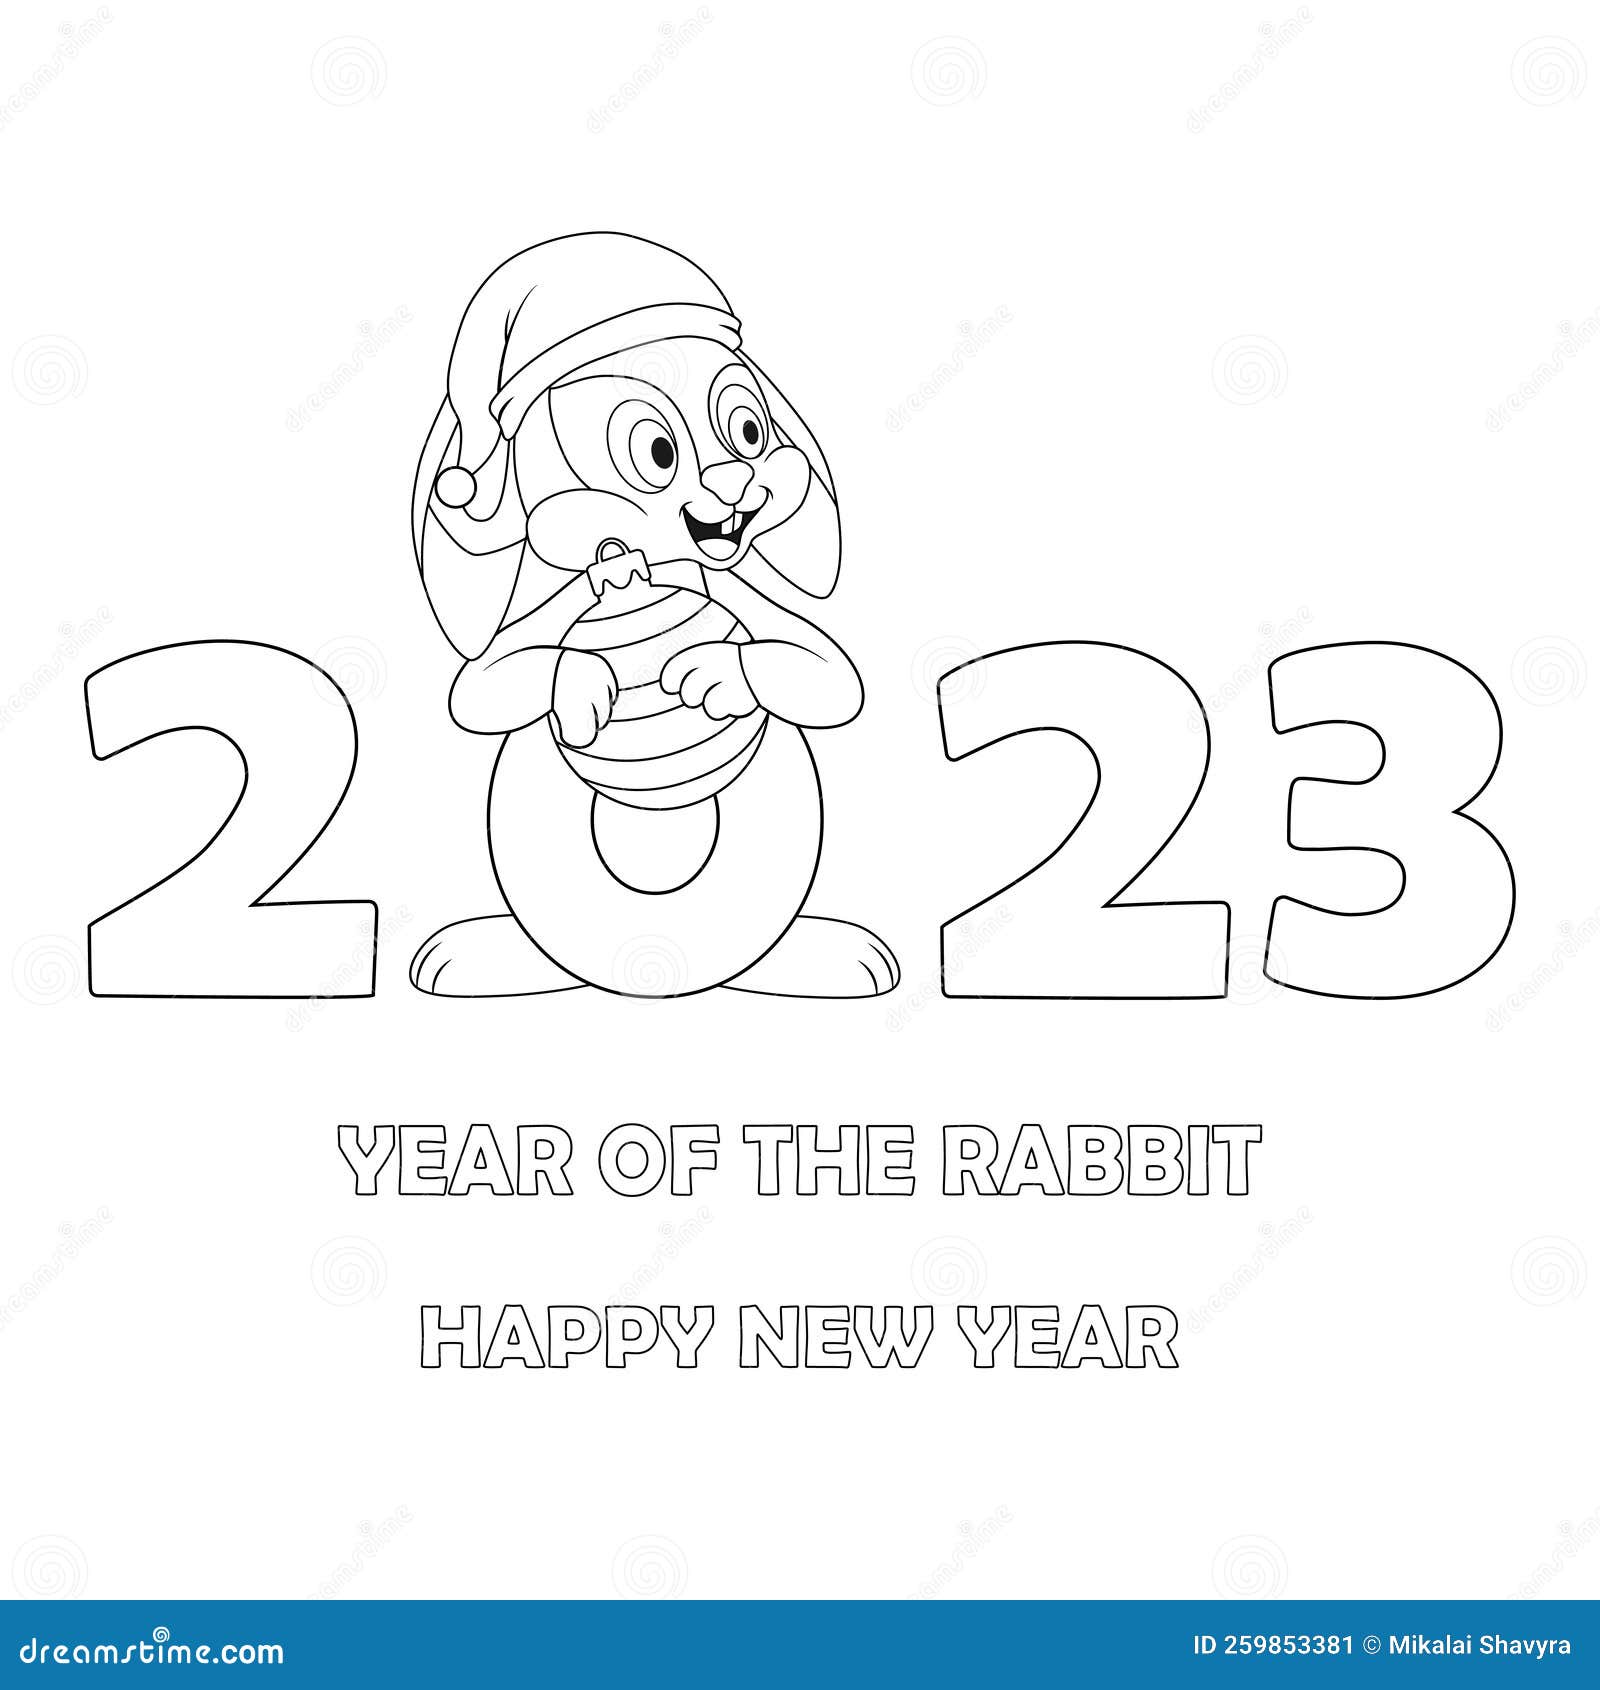 Colorless cartoon rabbit and numbers black and white template page for coloring book with bunny as symbol of new year stock vector